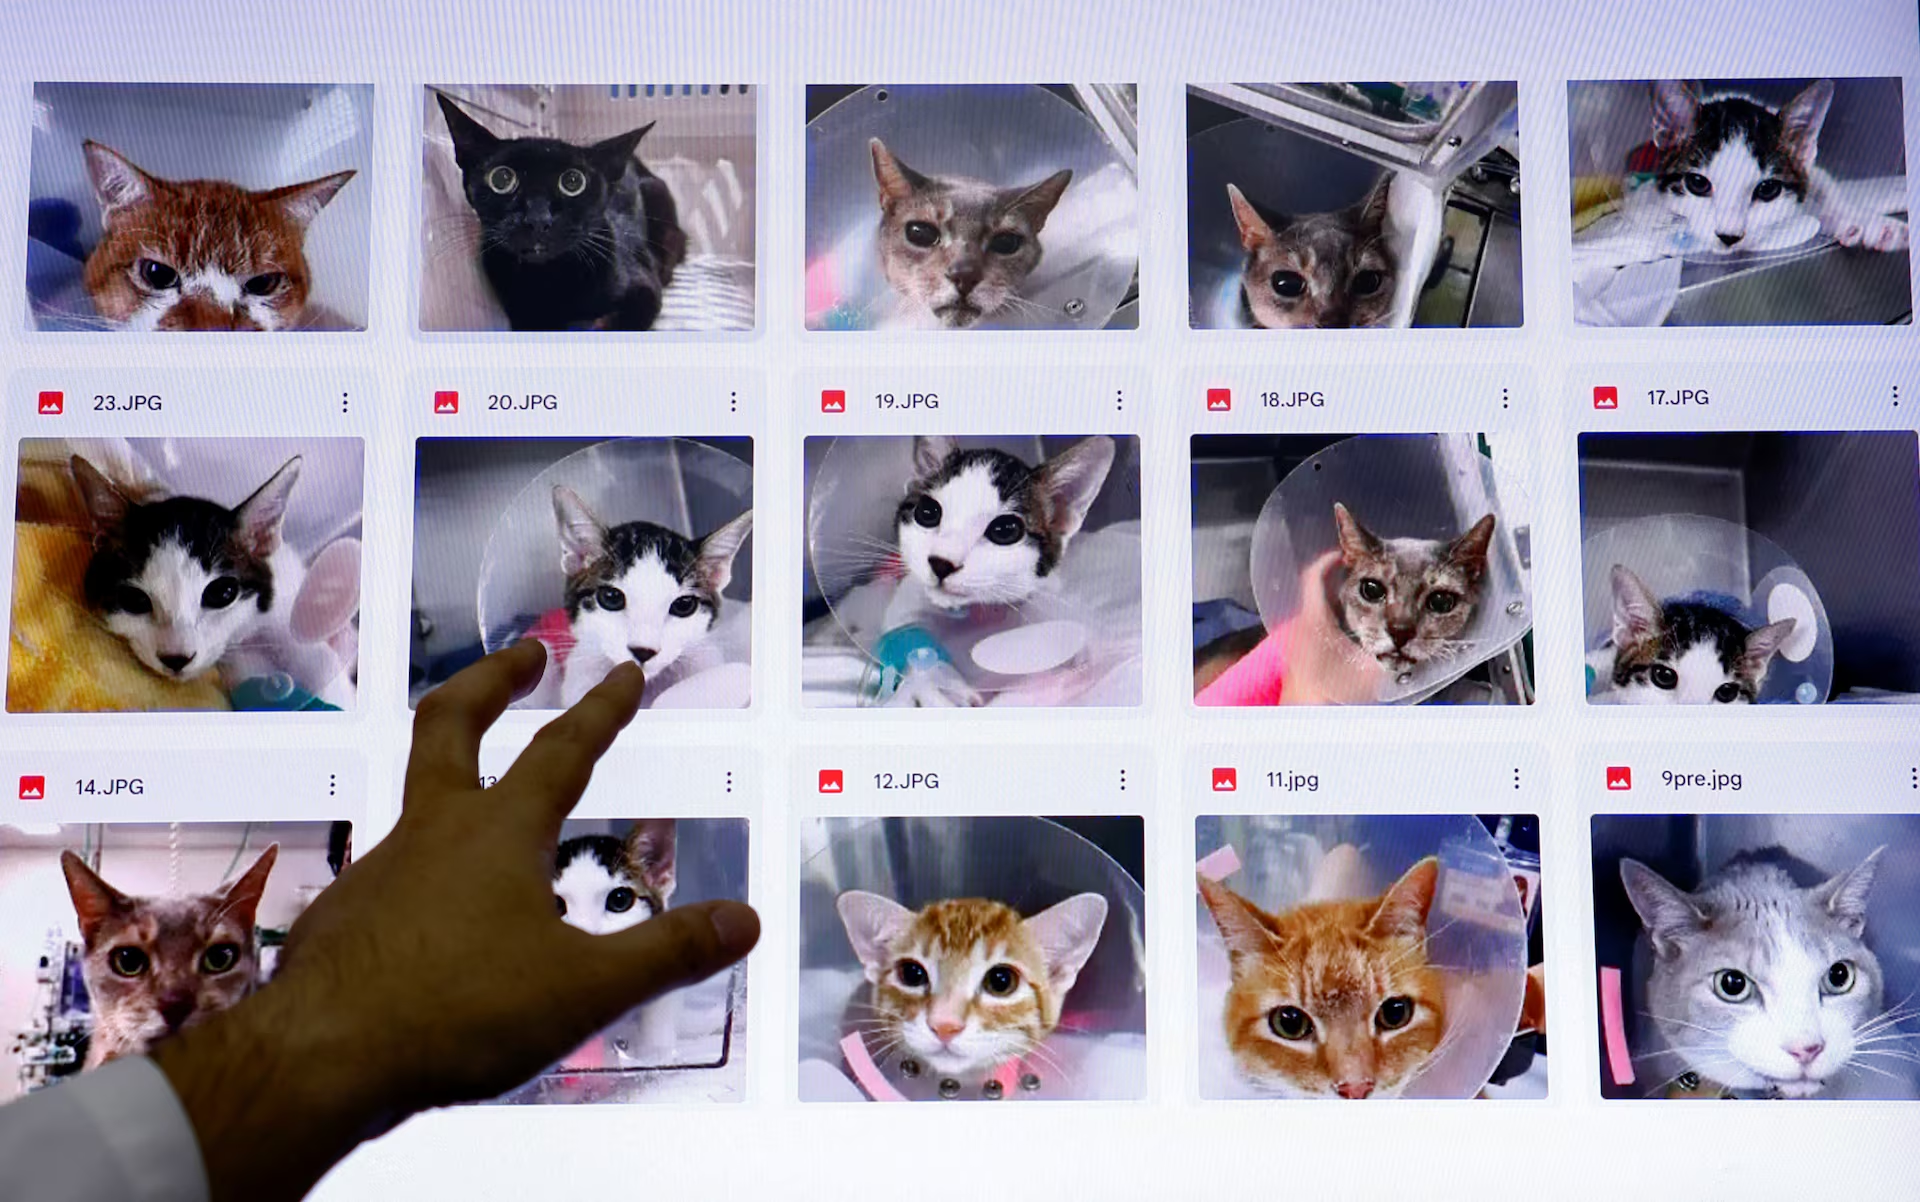 Professor Kazuya Edamura, head of Nihon University Animal Medical Center, points to cat photos on a computer screen used to train the AI of 